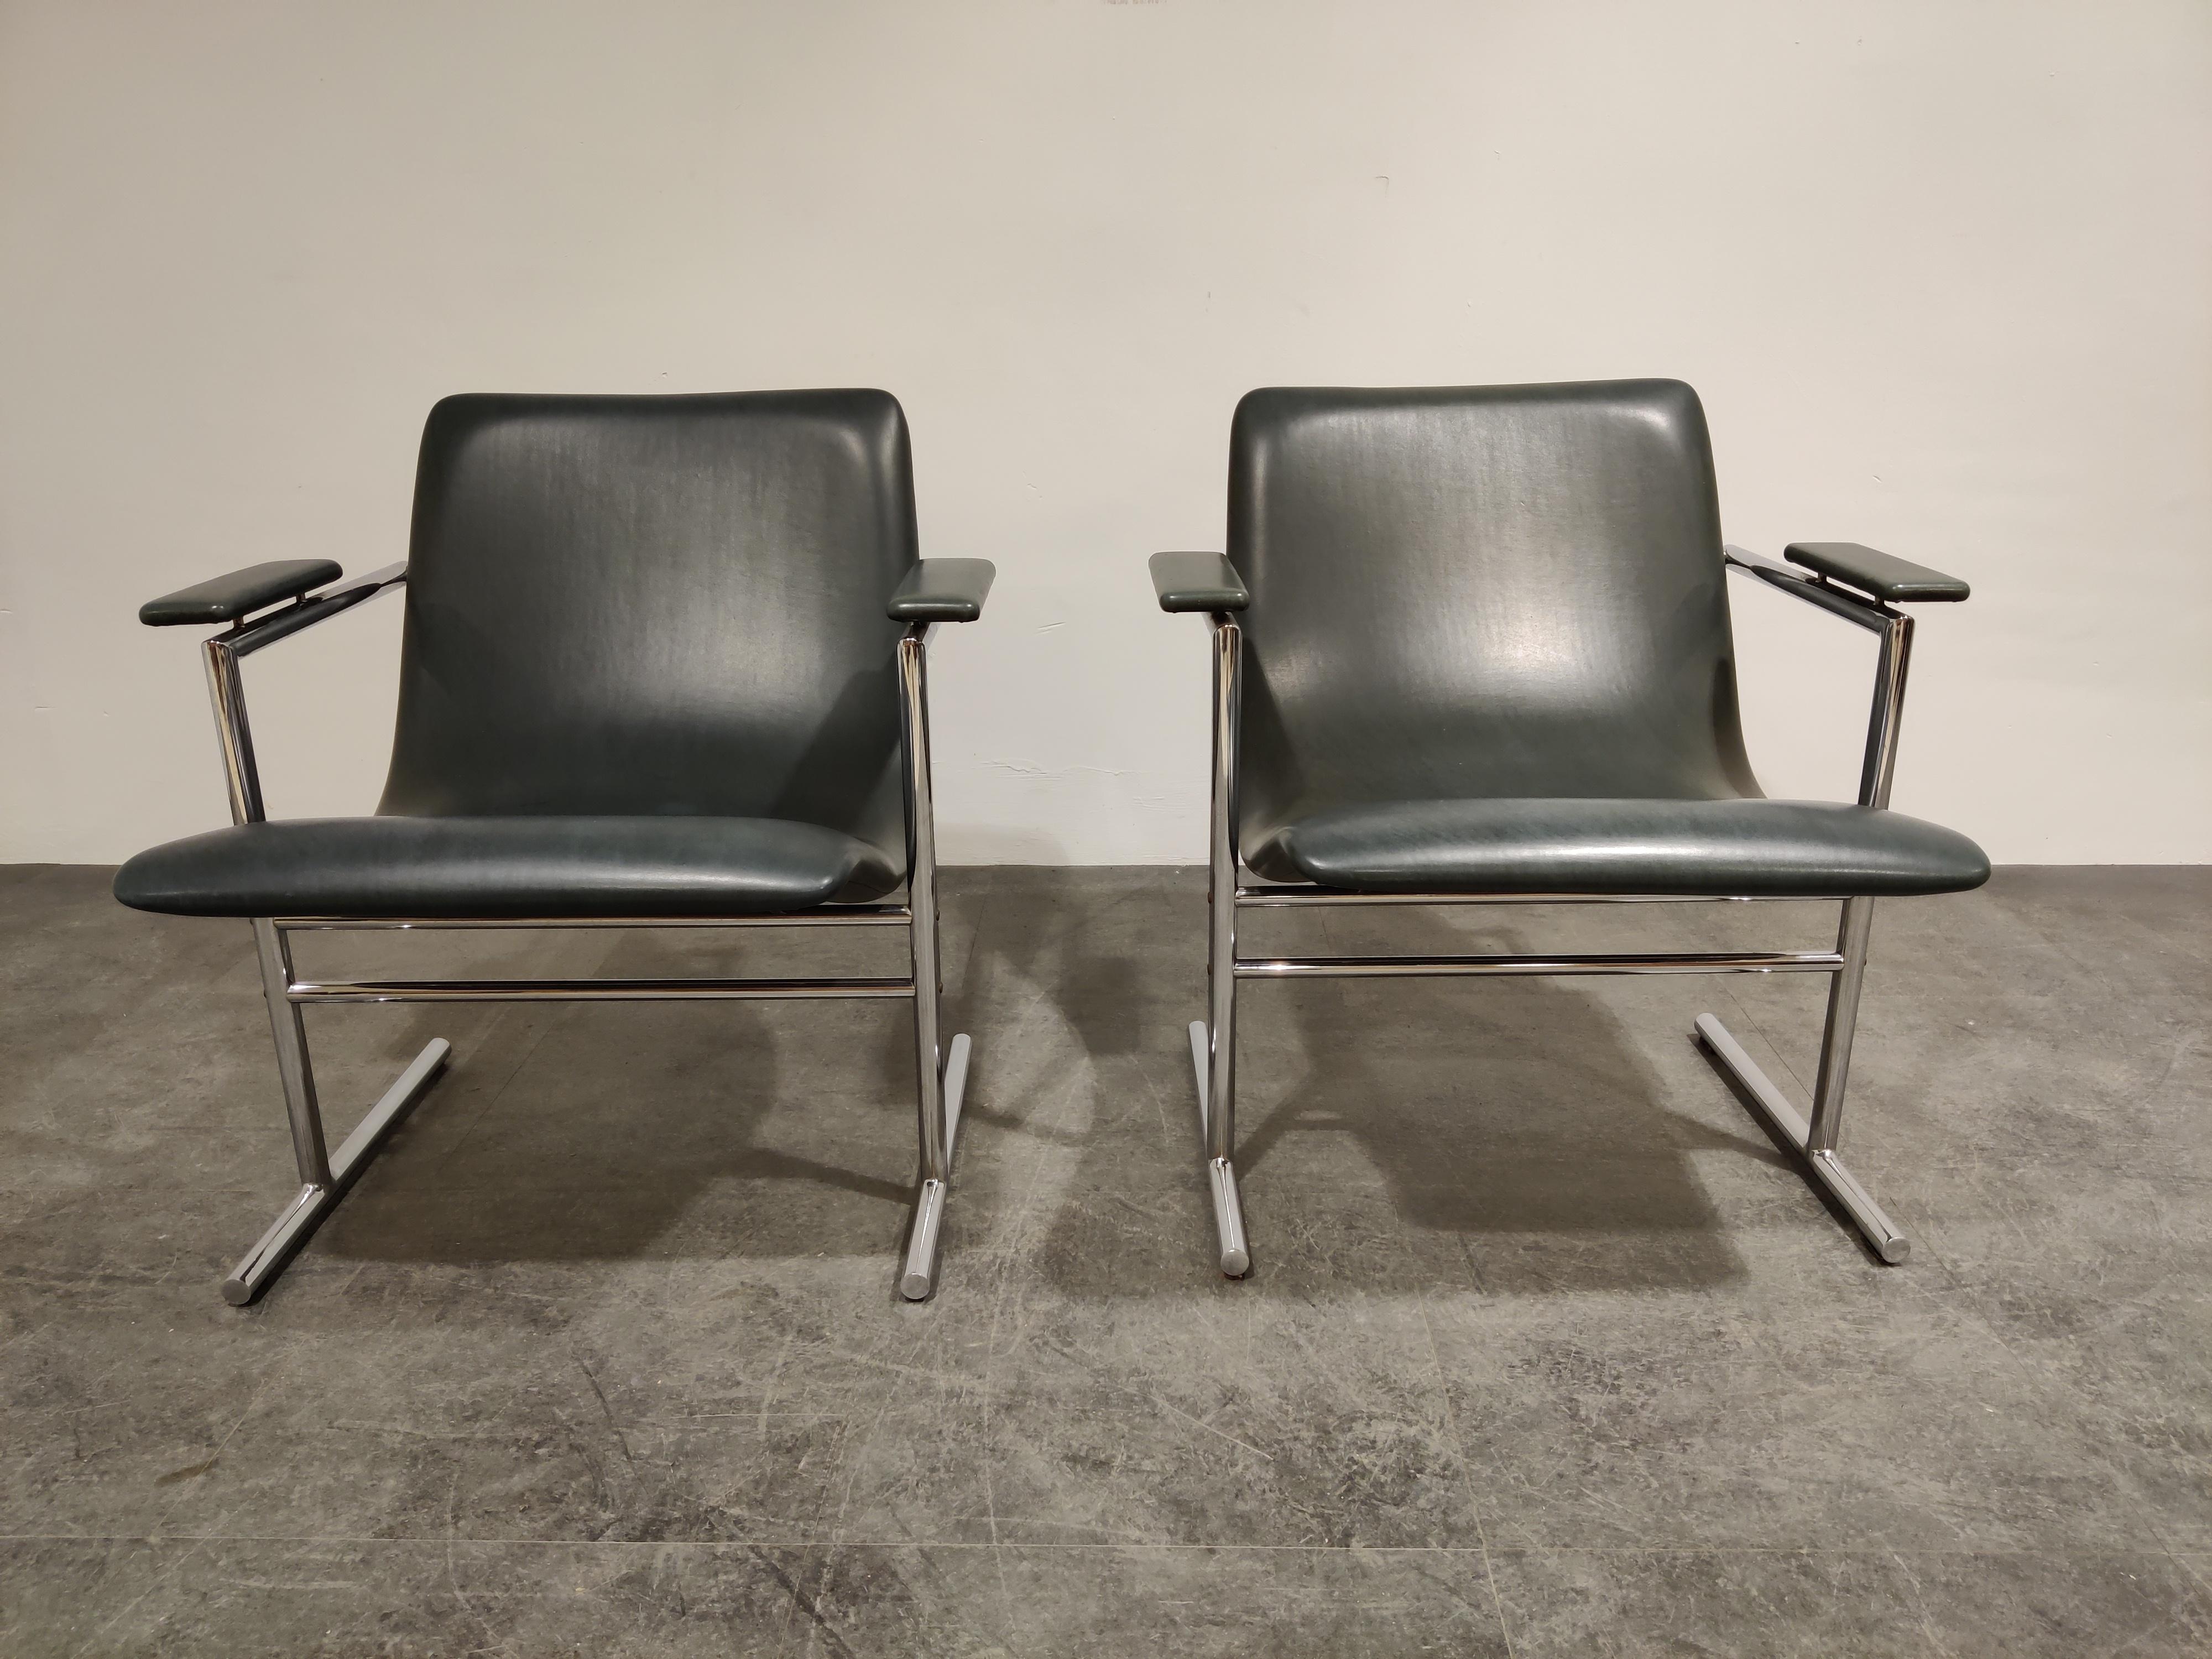 Pair of 'Oslo' lounge chairs by Rudi Verelst for Novalux.

These chairs seat very well due to their well-shaped seats

Seats and armrests are upholstered in black/grey skai or leatherette 

Good condition.

1970s, Belgium

Dimensions: 

Height 70 cm